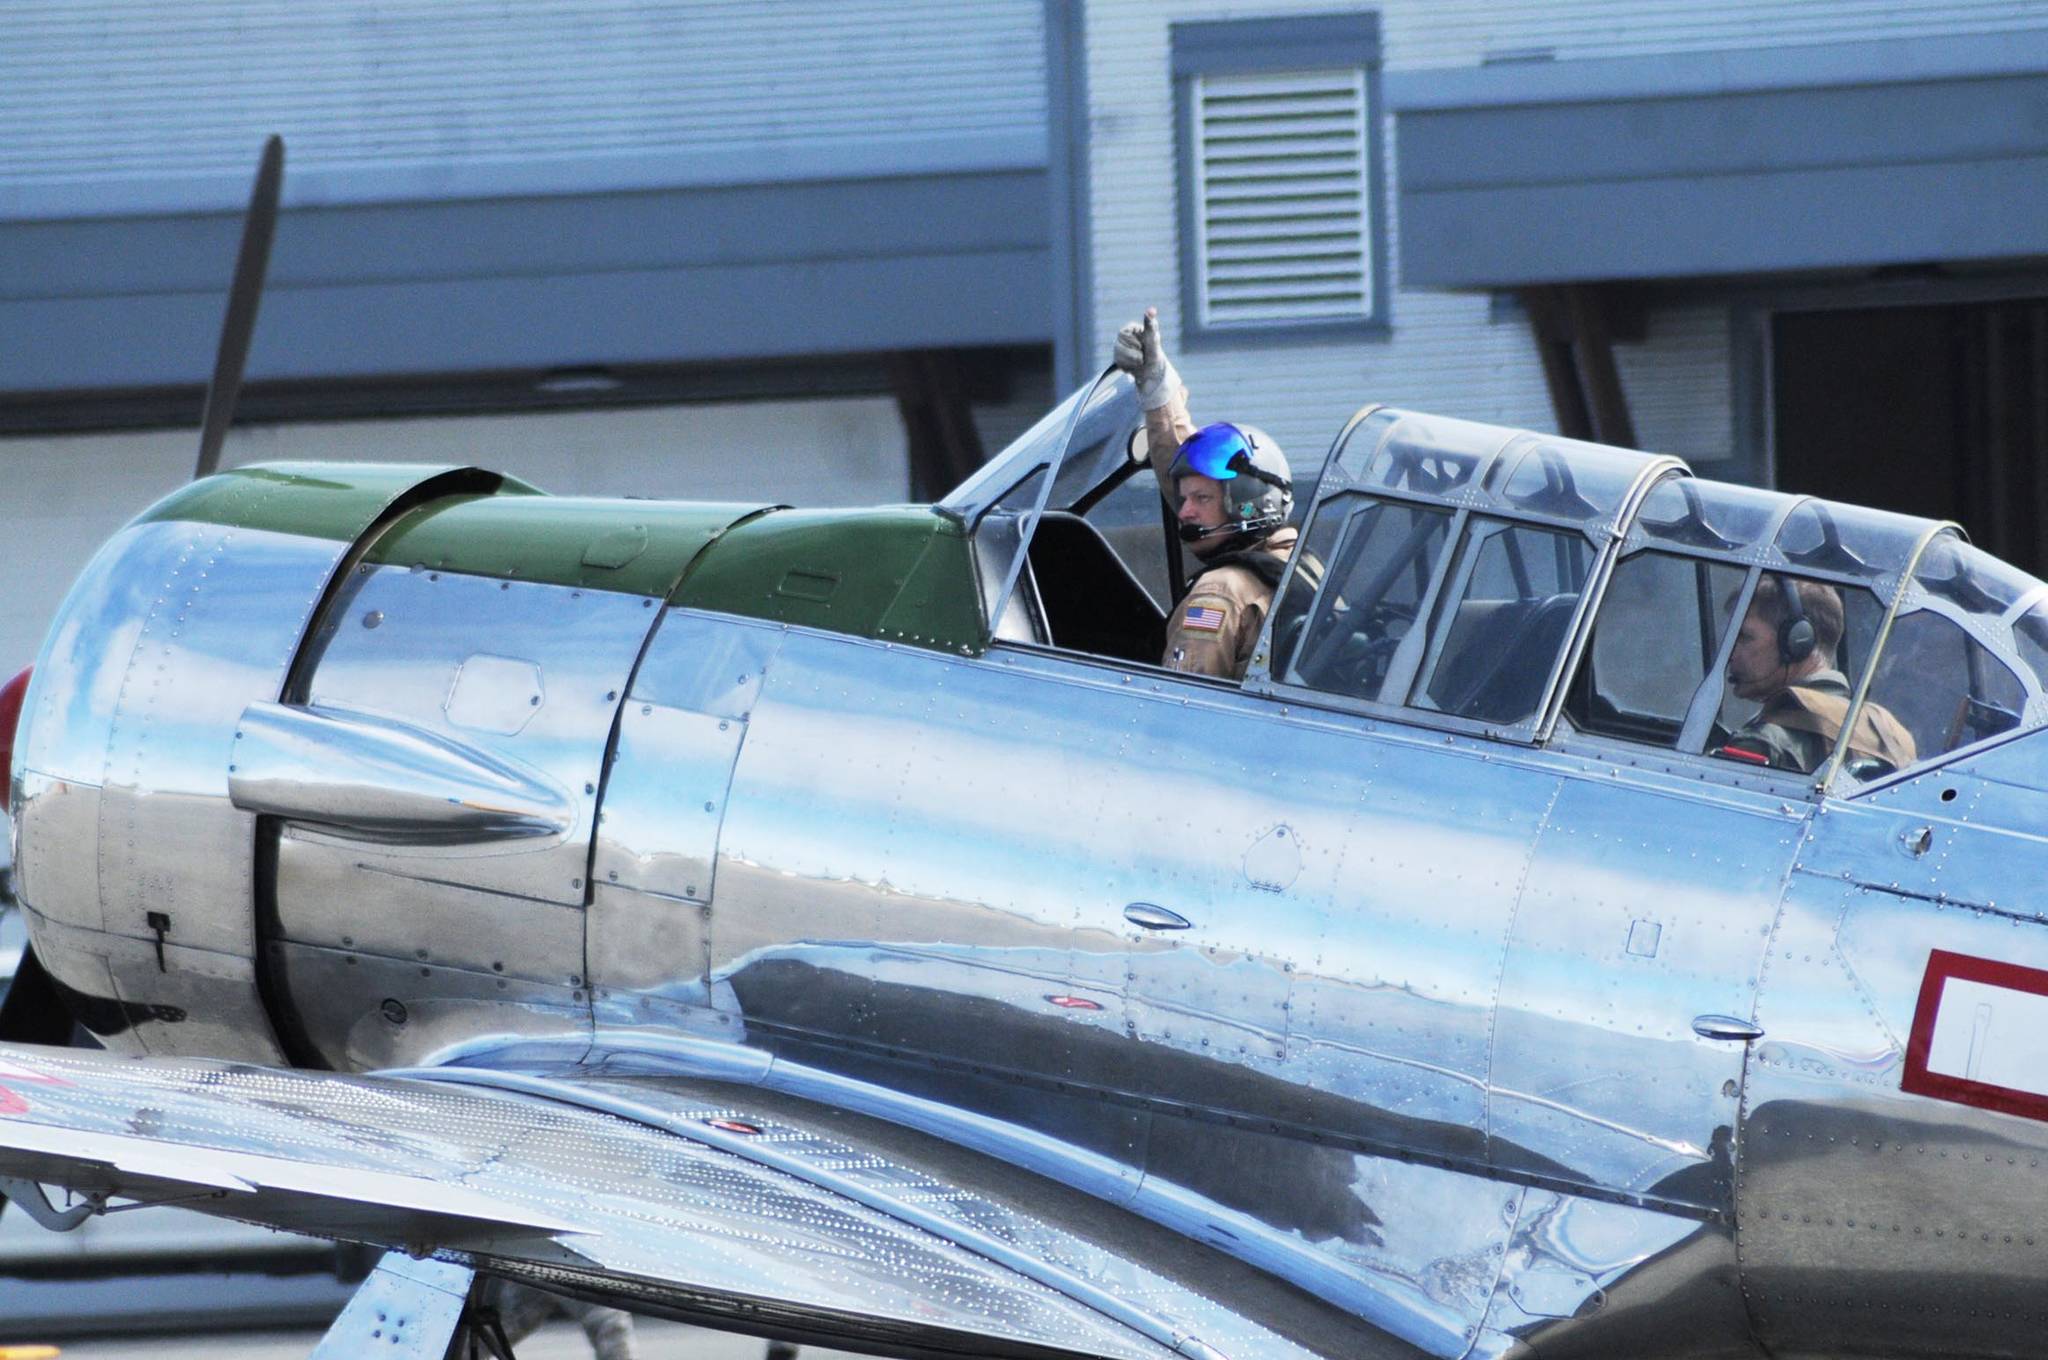 A pilot signals to the pilots on two nearby planes that he is ready to taxi at the Kenai Air Fair at the Kenai Municipal Airport on Saturday, June 9, 2018 in Kenai, Alaska. (Photo by Elizabeth Earl/Peninsula Clarion)